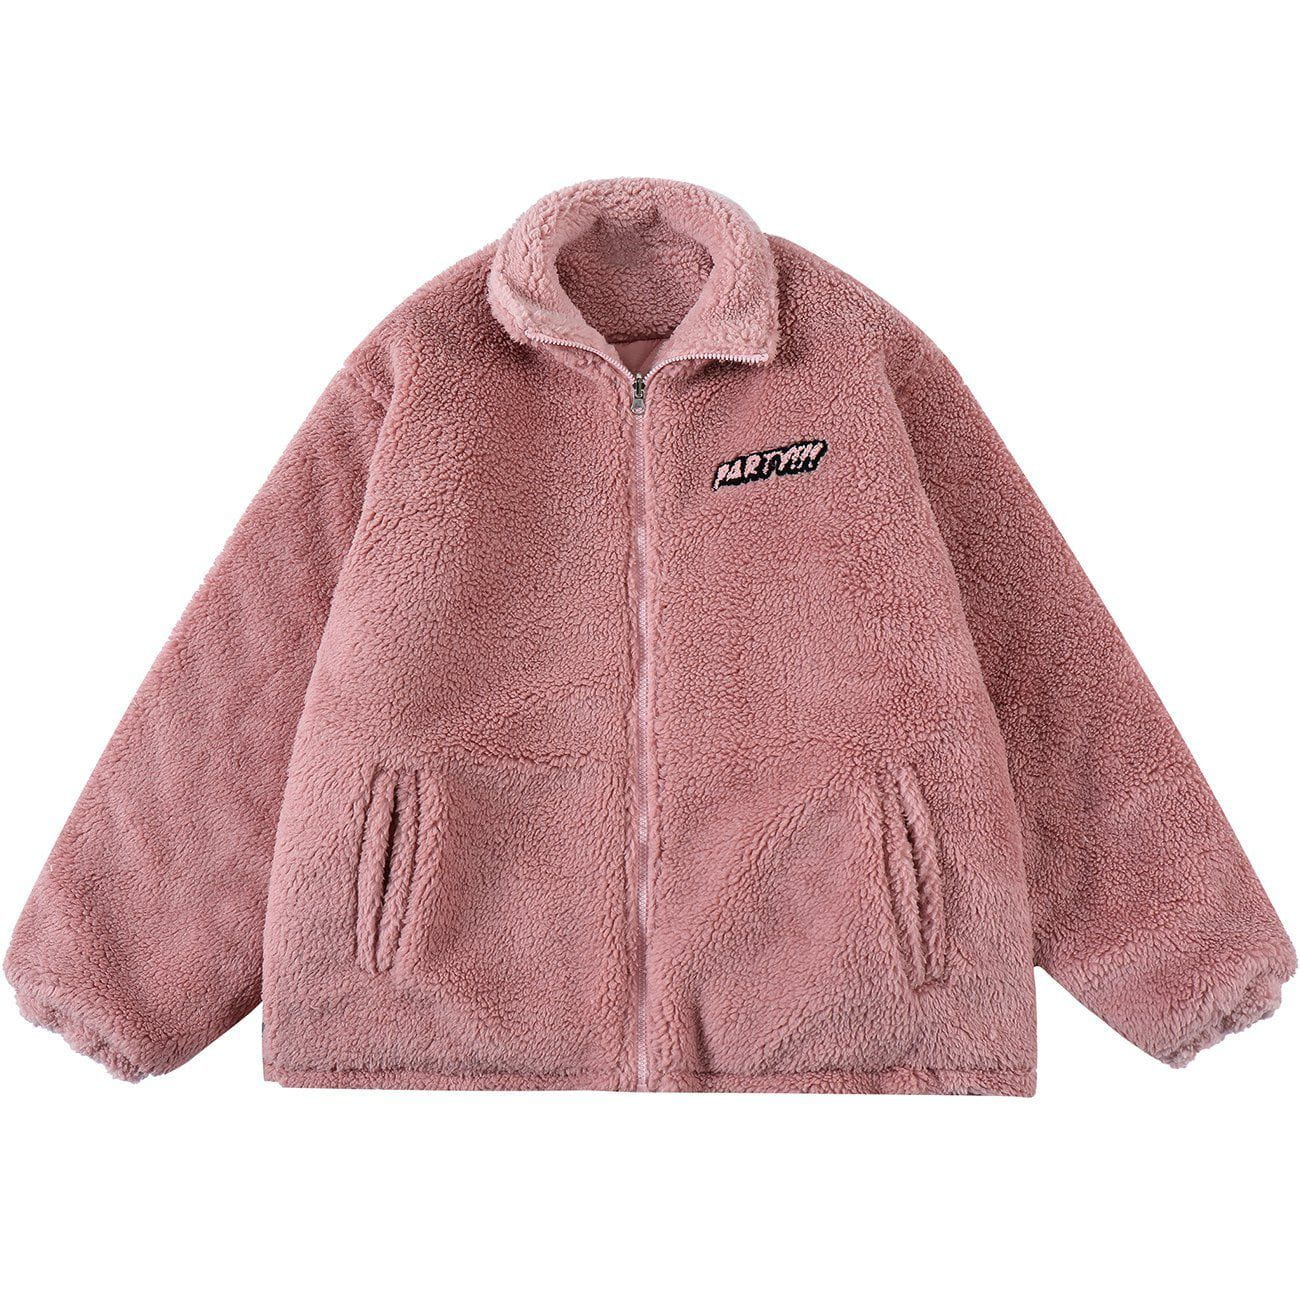 Sneakerland™ - Towel Embroidered Reversible Sherpa Winter Coat